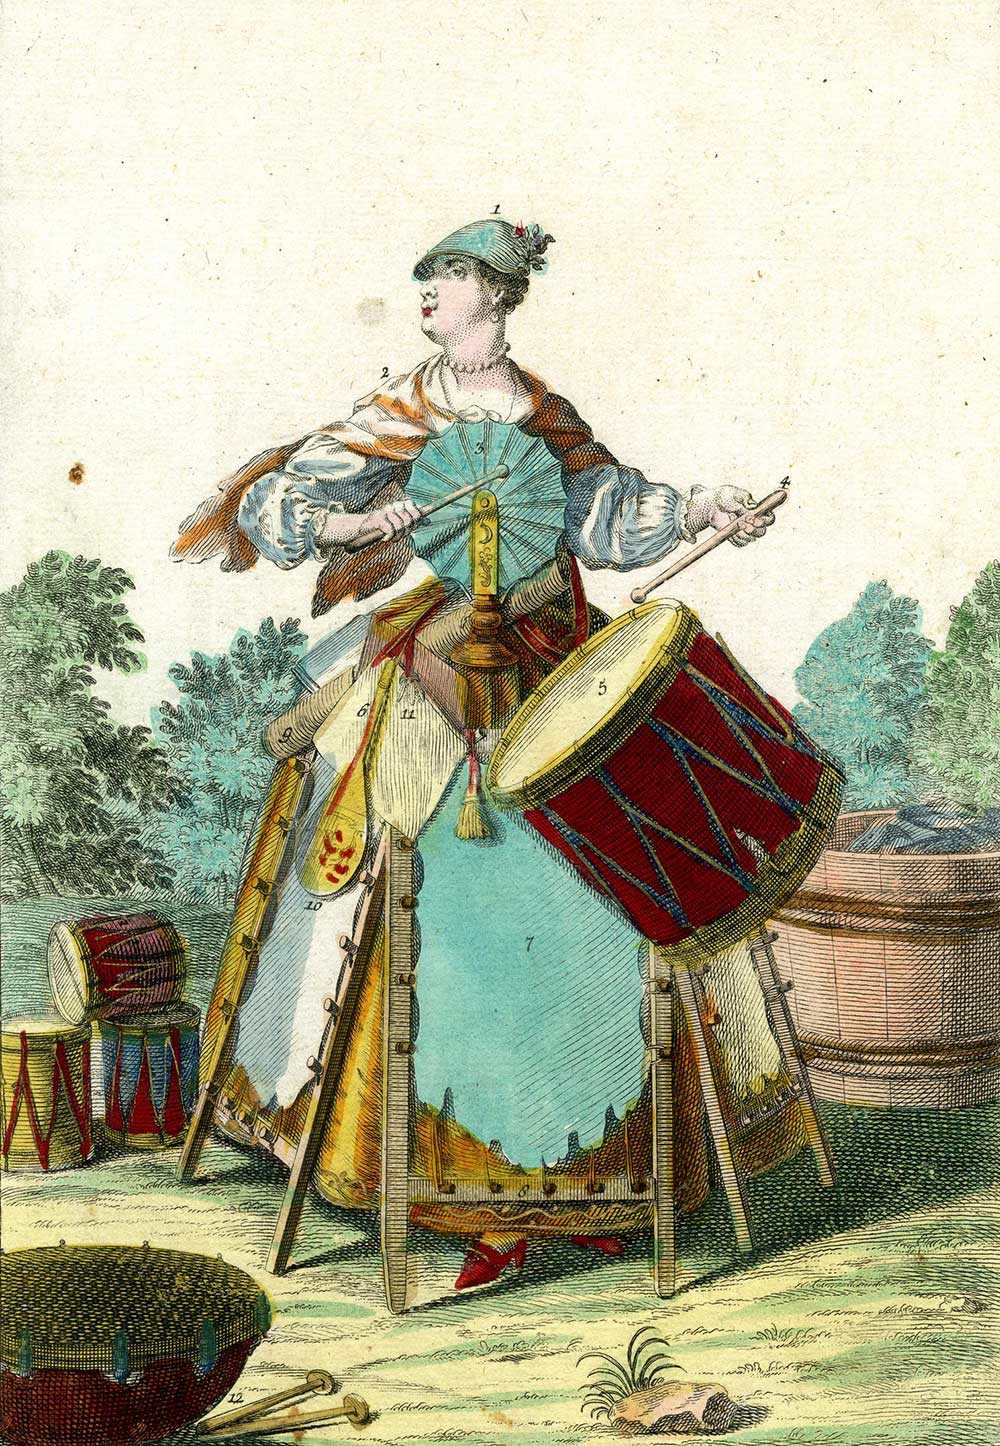 Female parchment maker dressed in fans and frames with stretched skins, striking a large parchment-covered drum. c. 1730.